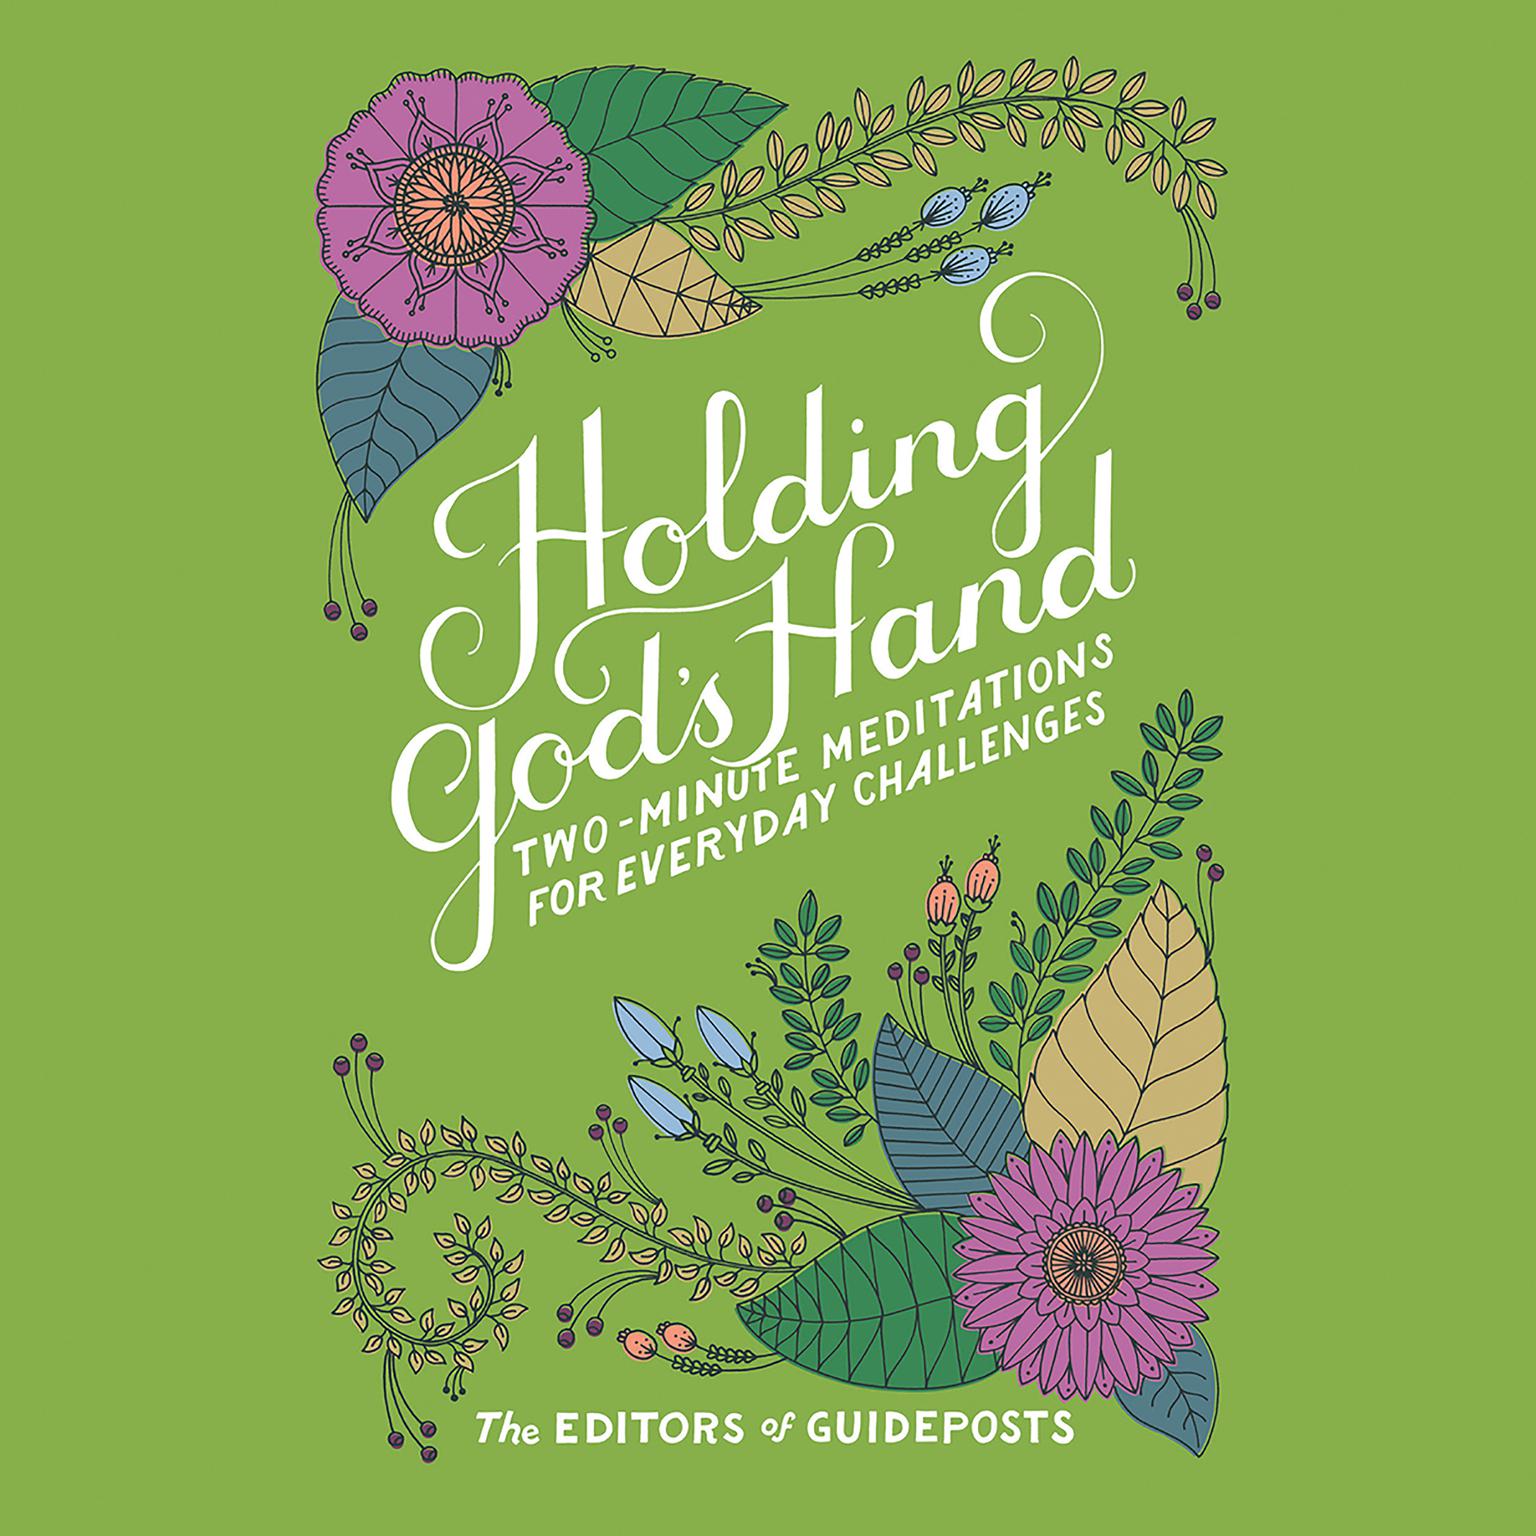 Holding Gods Hand: Two-Minute Meditations for Everyday Challenges Audiobook, by The Editors of Guideposts